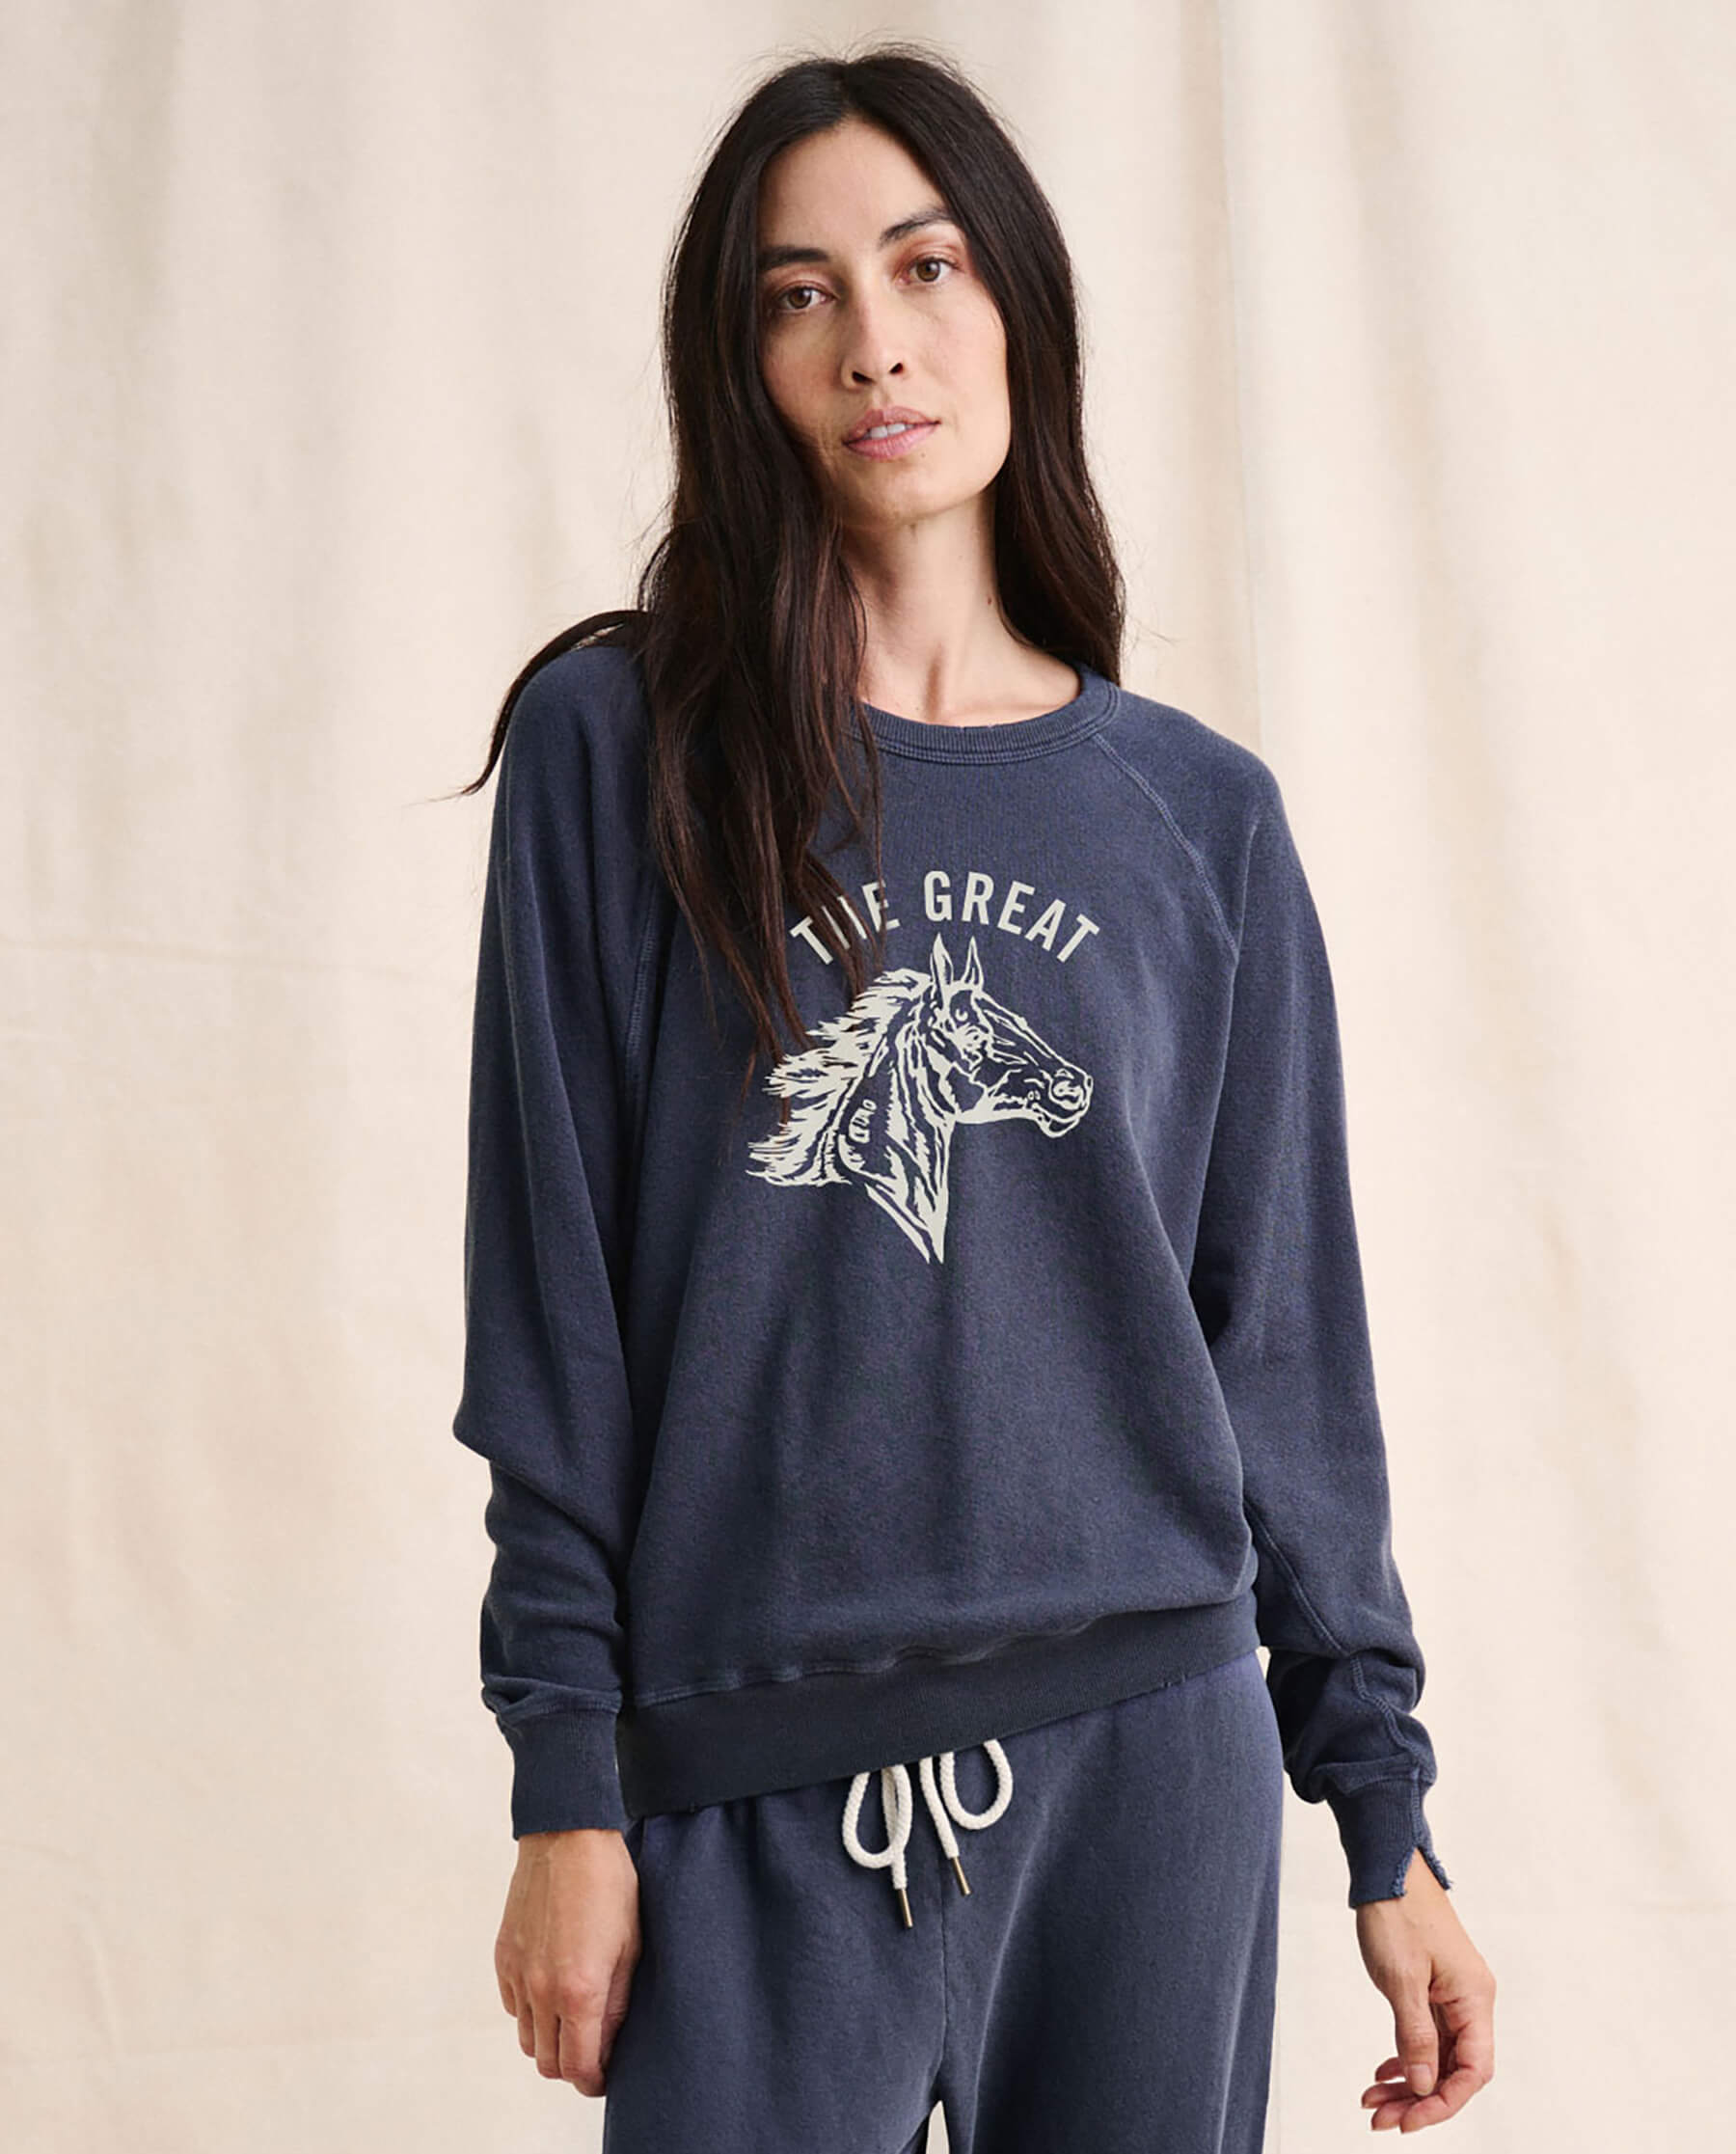 The College Sweatshirt. Graphic -- Washed Navy with Cream Bronco Graphic